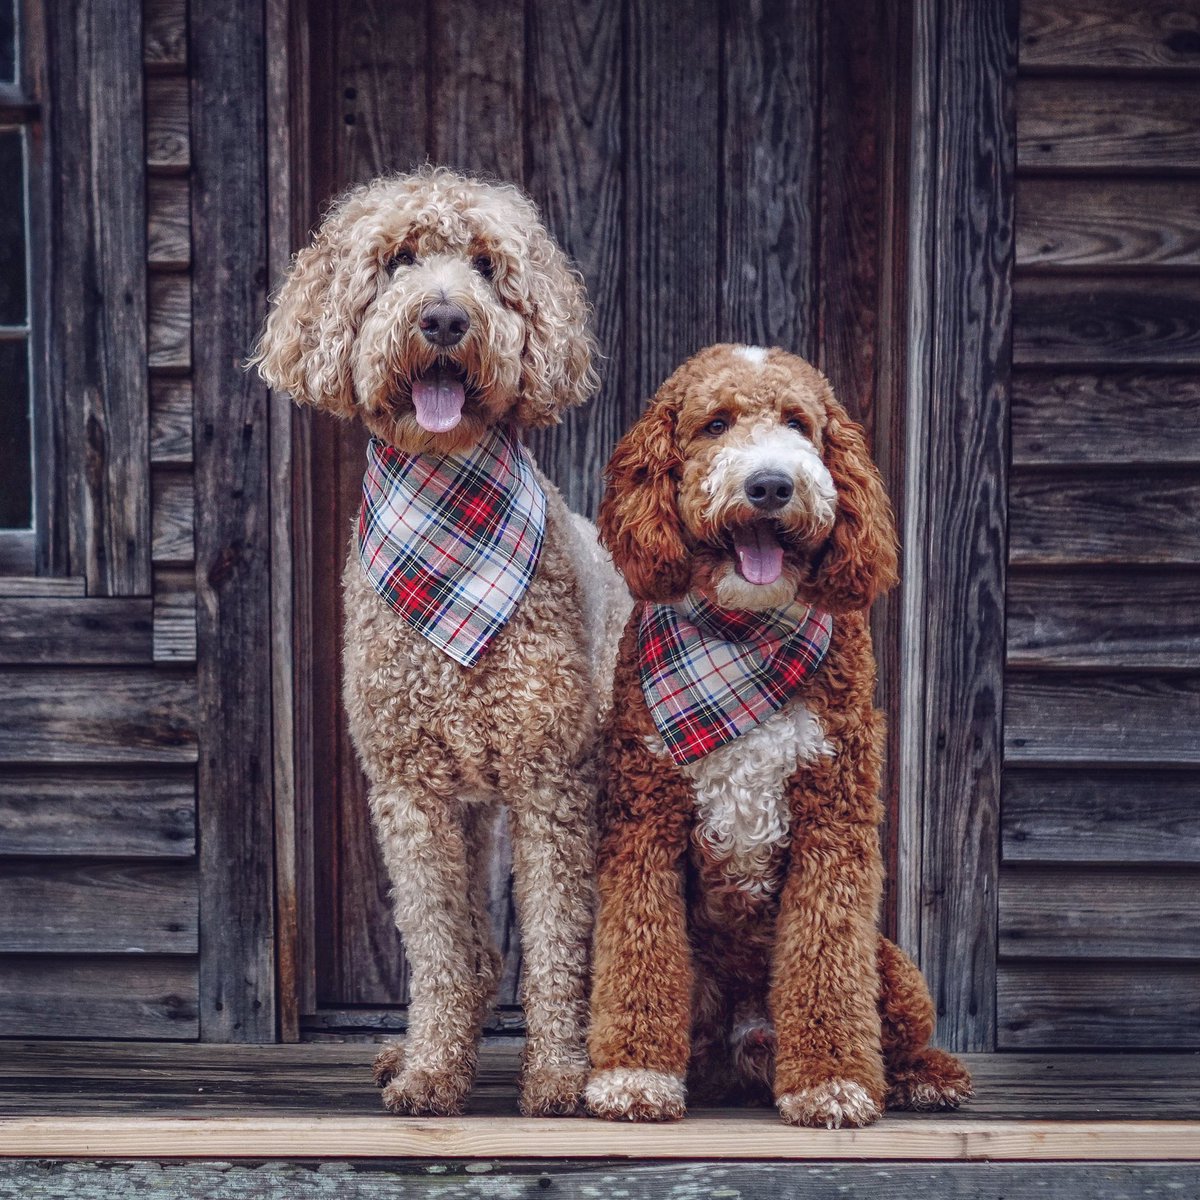 Two is greater than one. 

#dogs #goldendoodle #puppies #cutedogs #indythegoldendoodle

@Petco 
@CountryLiving 
@dogs 
@Chewy 
@Benebone 
@Adorably 
@TheEllenShow 
@PetSmart